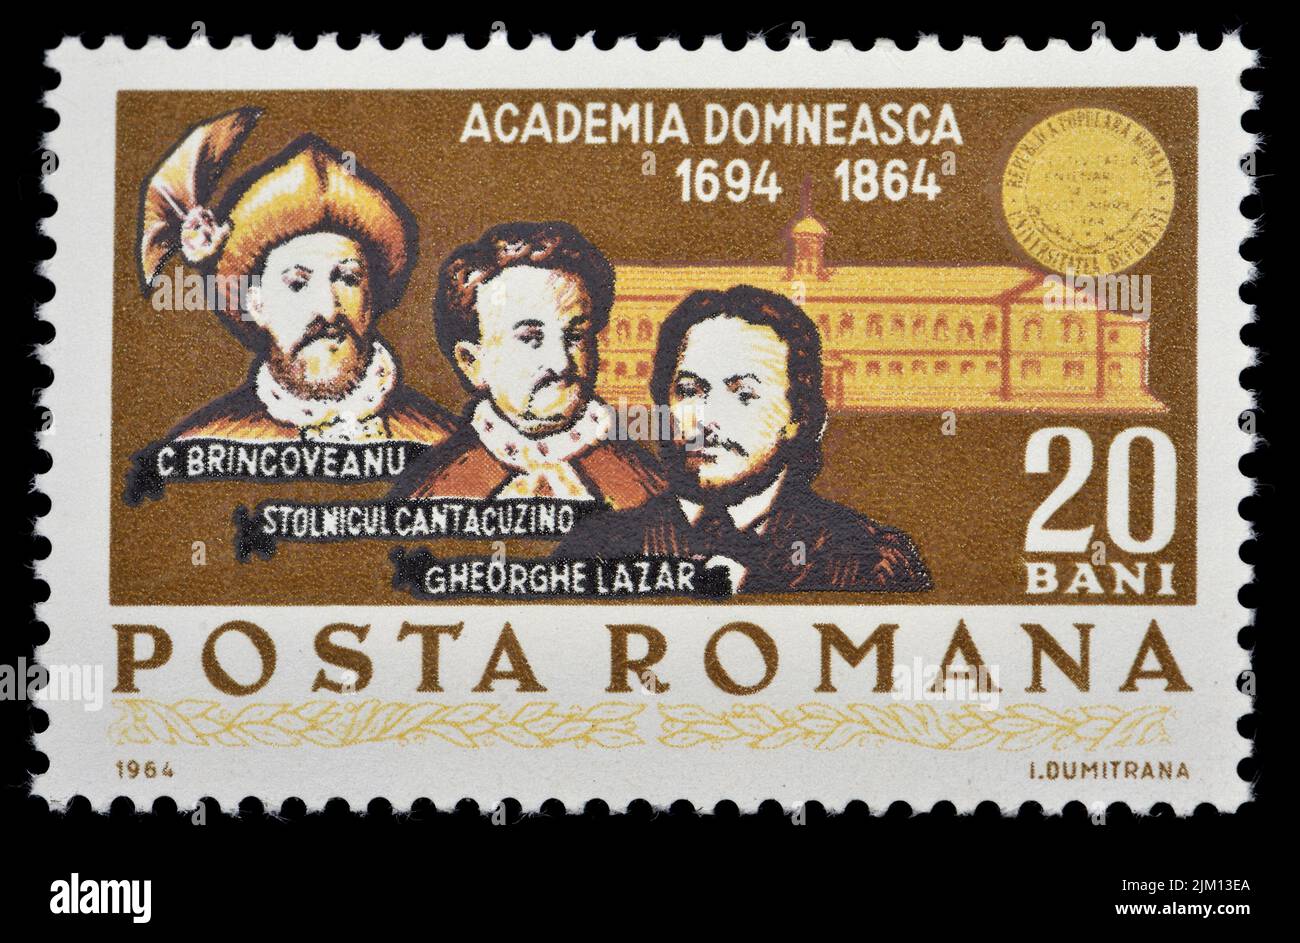 Romanian postage stamp (1964) : 200 years of the Royal academy 1694 - 1864 Stock Photo